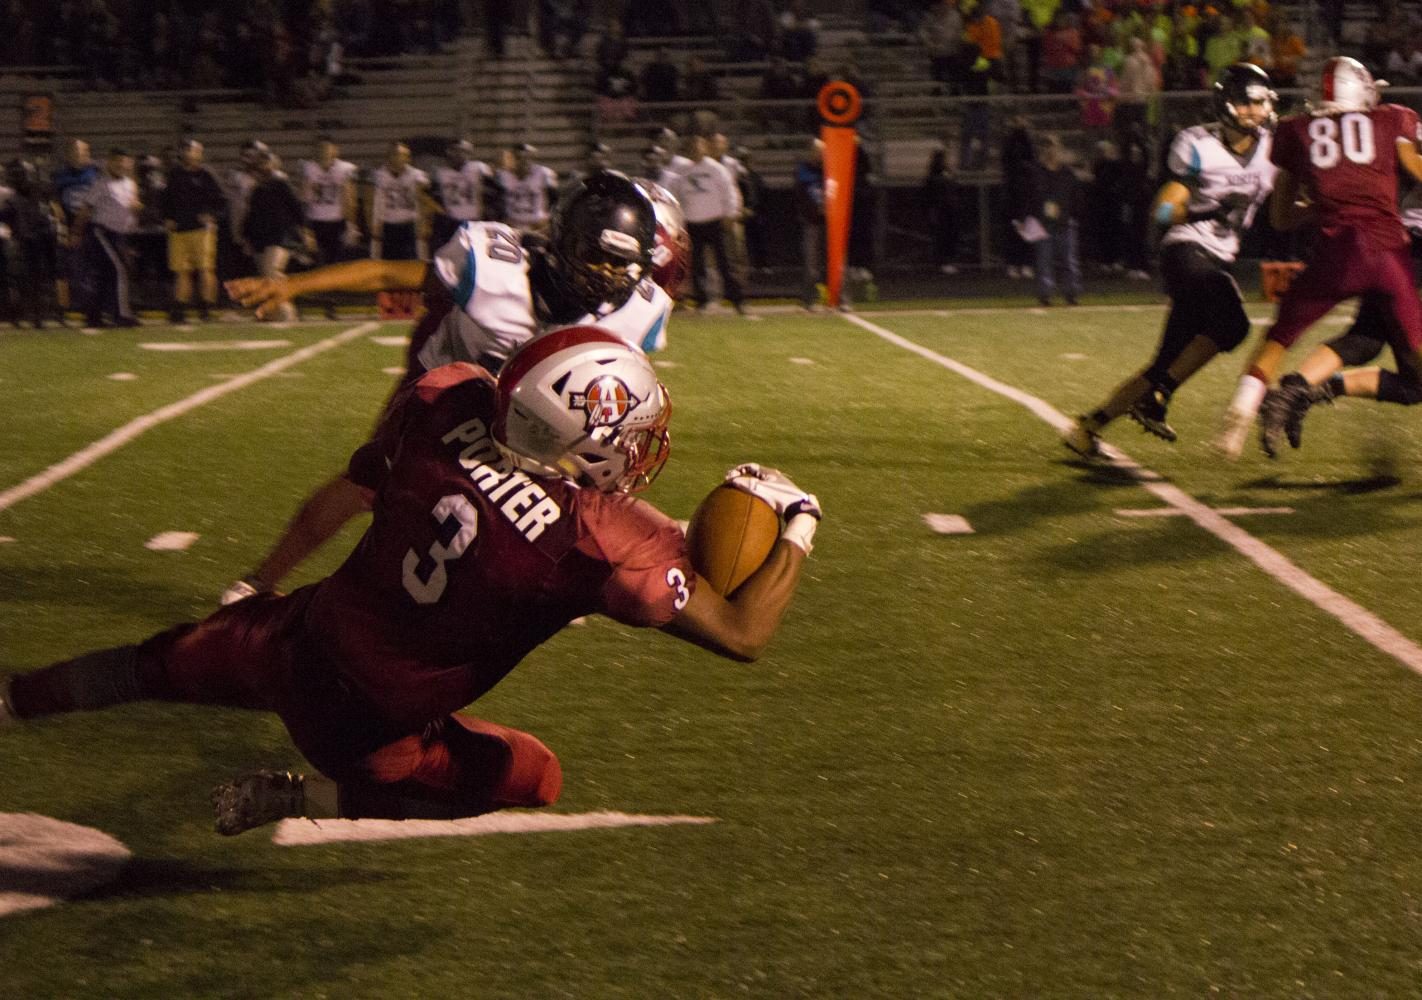 Senior Drew Porter falls to his knees to catch a pass in Friday nights game against Woodstock North.